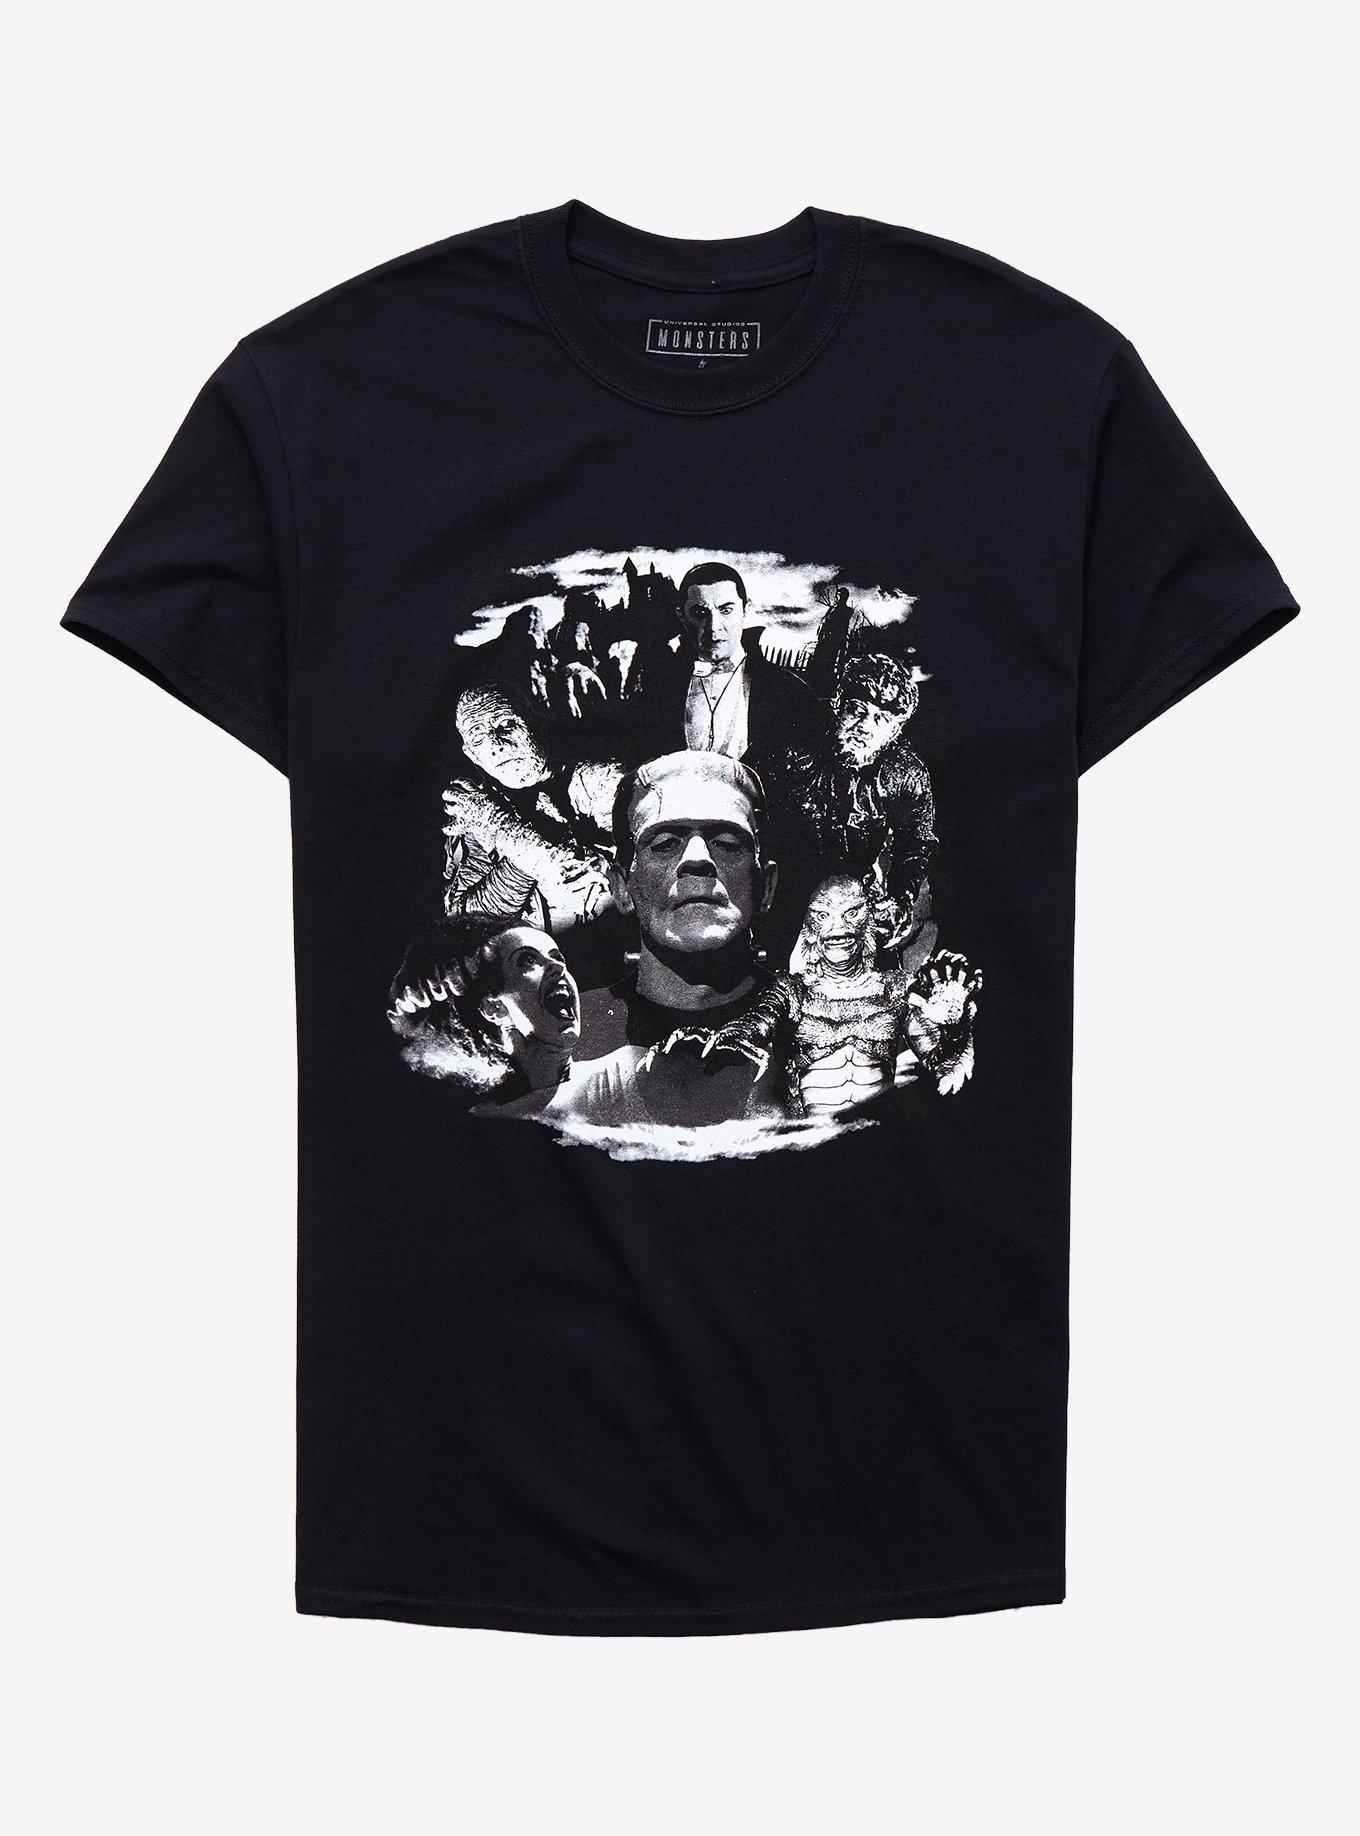 Universal Monsters Collage T-Shirt, BLACK, hi-res